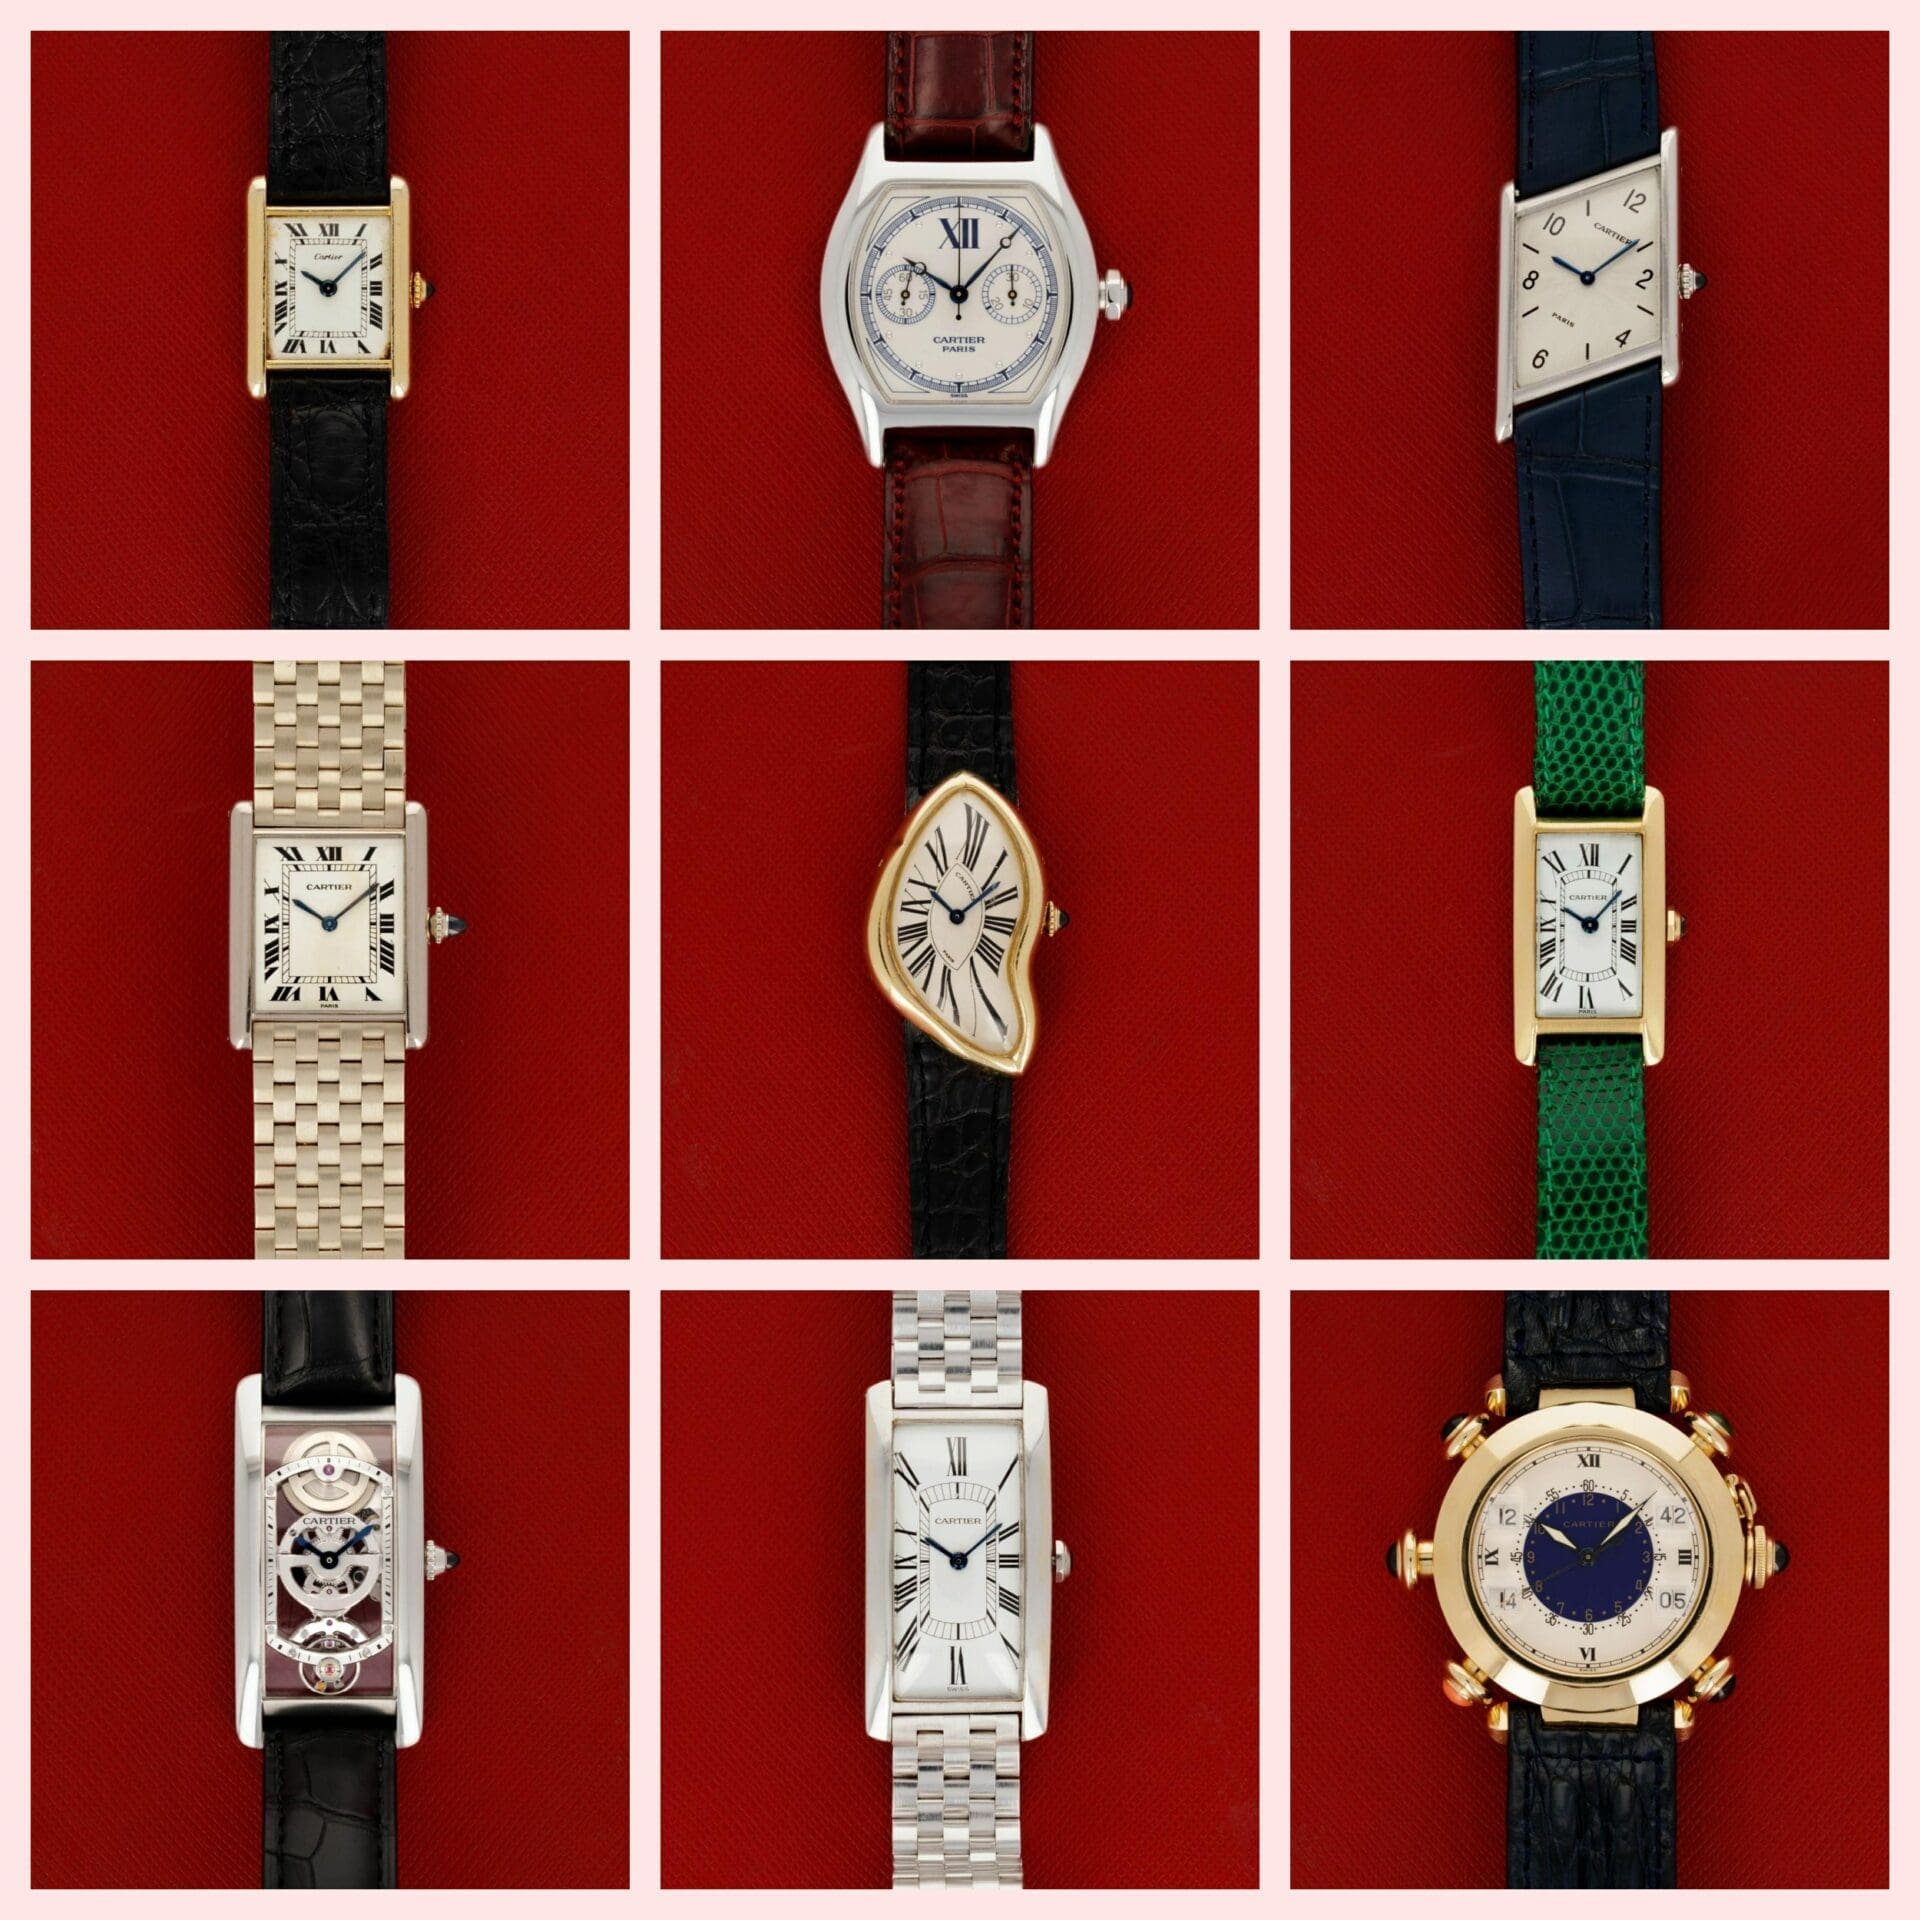 Cartier fanatics rejoice! Loupe This is auctioning a treasure trove of vintage rarities this week